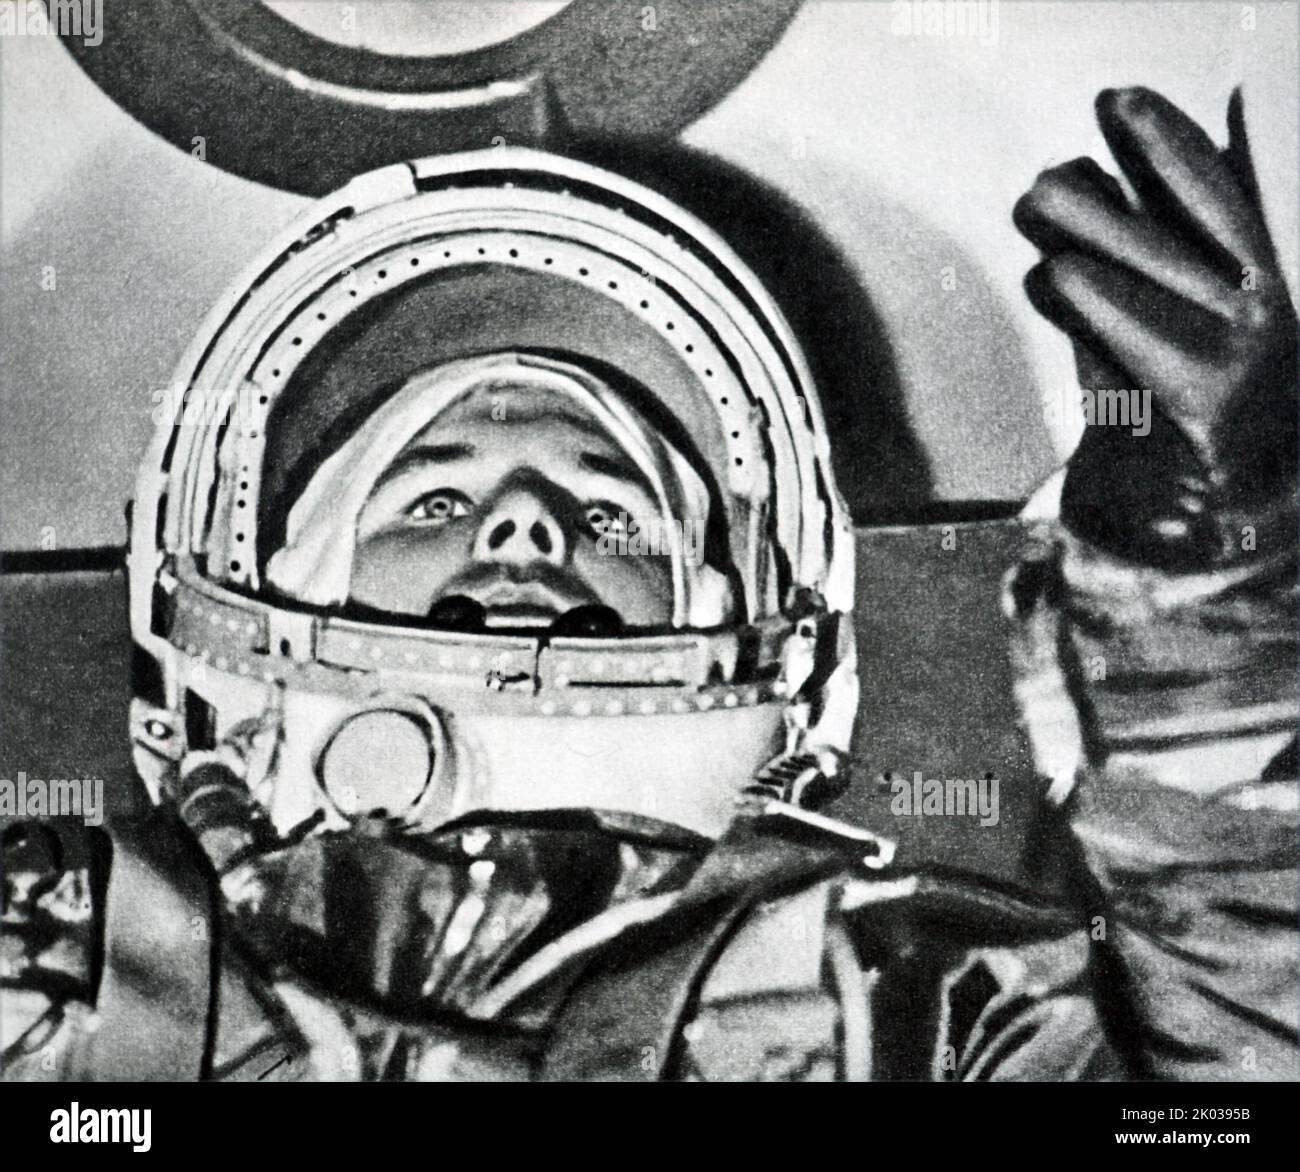 Vostok 1 was the first spaceflight of the Vostok programme and the first human spaceflight in history. Launched from Baikonur Cosmodrome on April 12, 1961, with Soviet cosmonaut Yuri Gagarin aboard, making him the first human to cross into outer space. Stock Photo